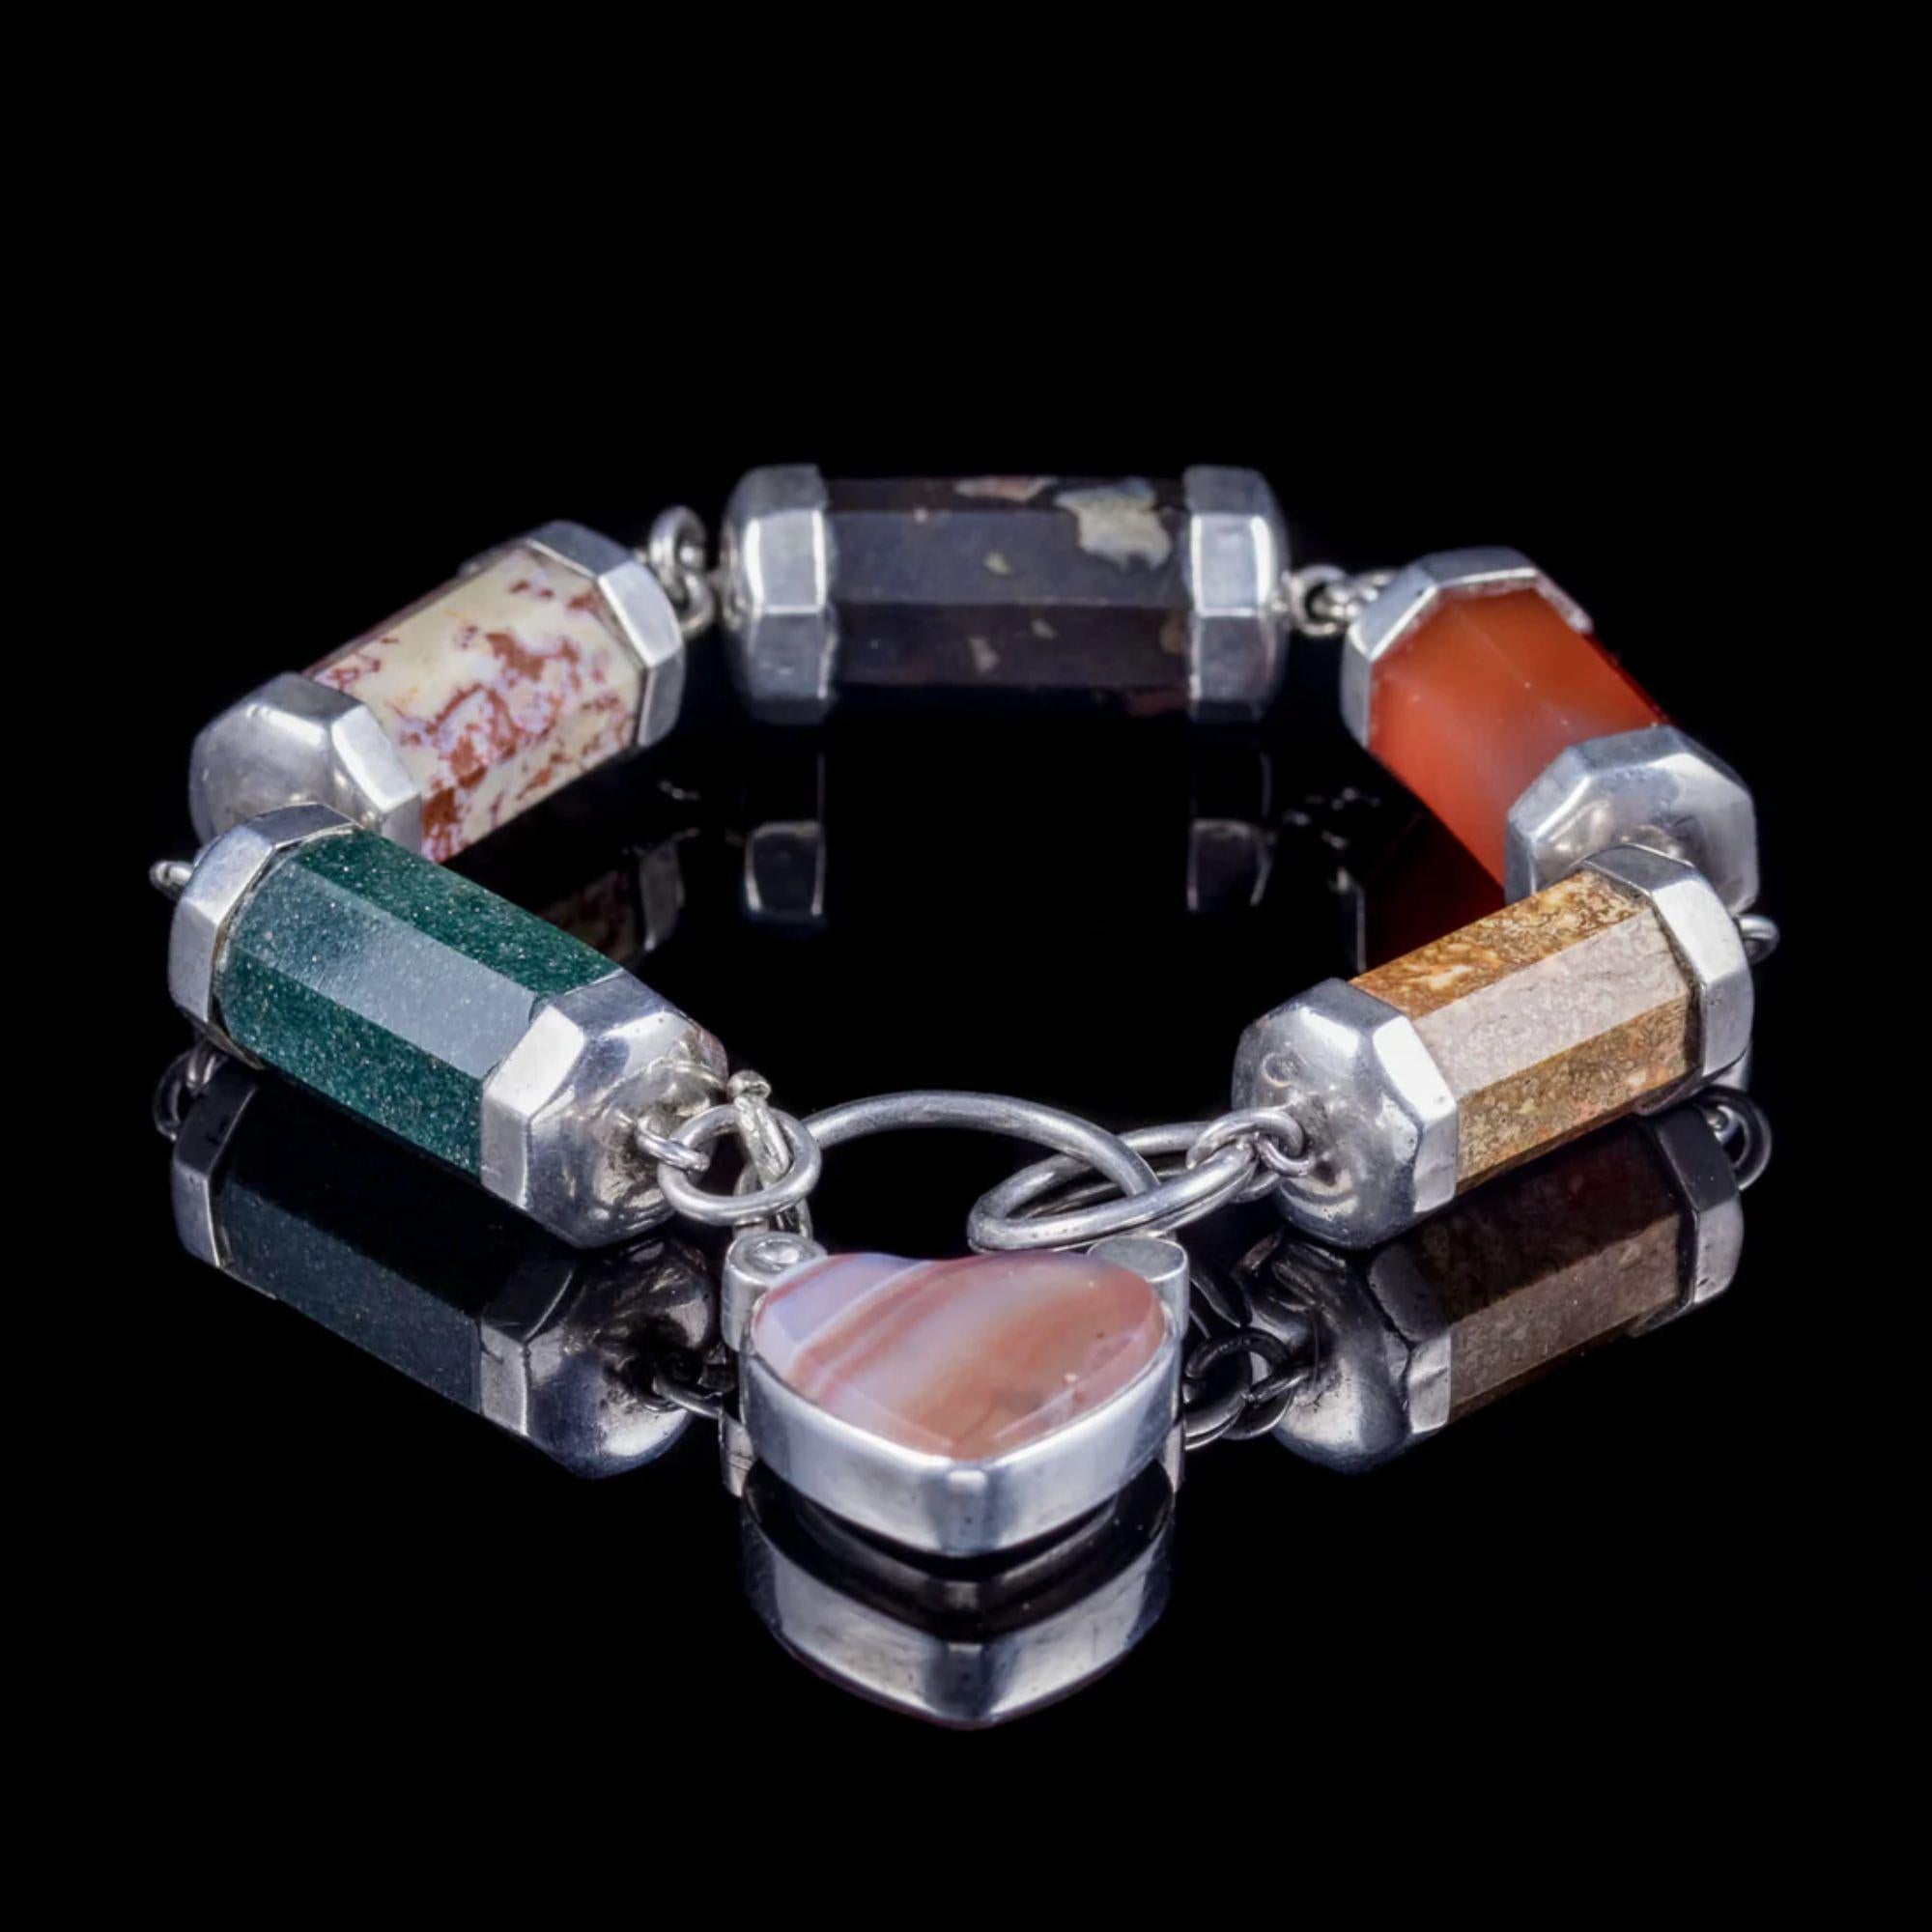 A wonderful antique Scottish bracelet from the late Victorian era made up of colourful barrel agate links held in silver settings. Each Agate is unique and boasts various earthy colours and patterned layers which are naturally formed, earning it the